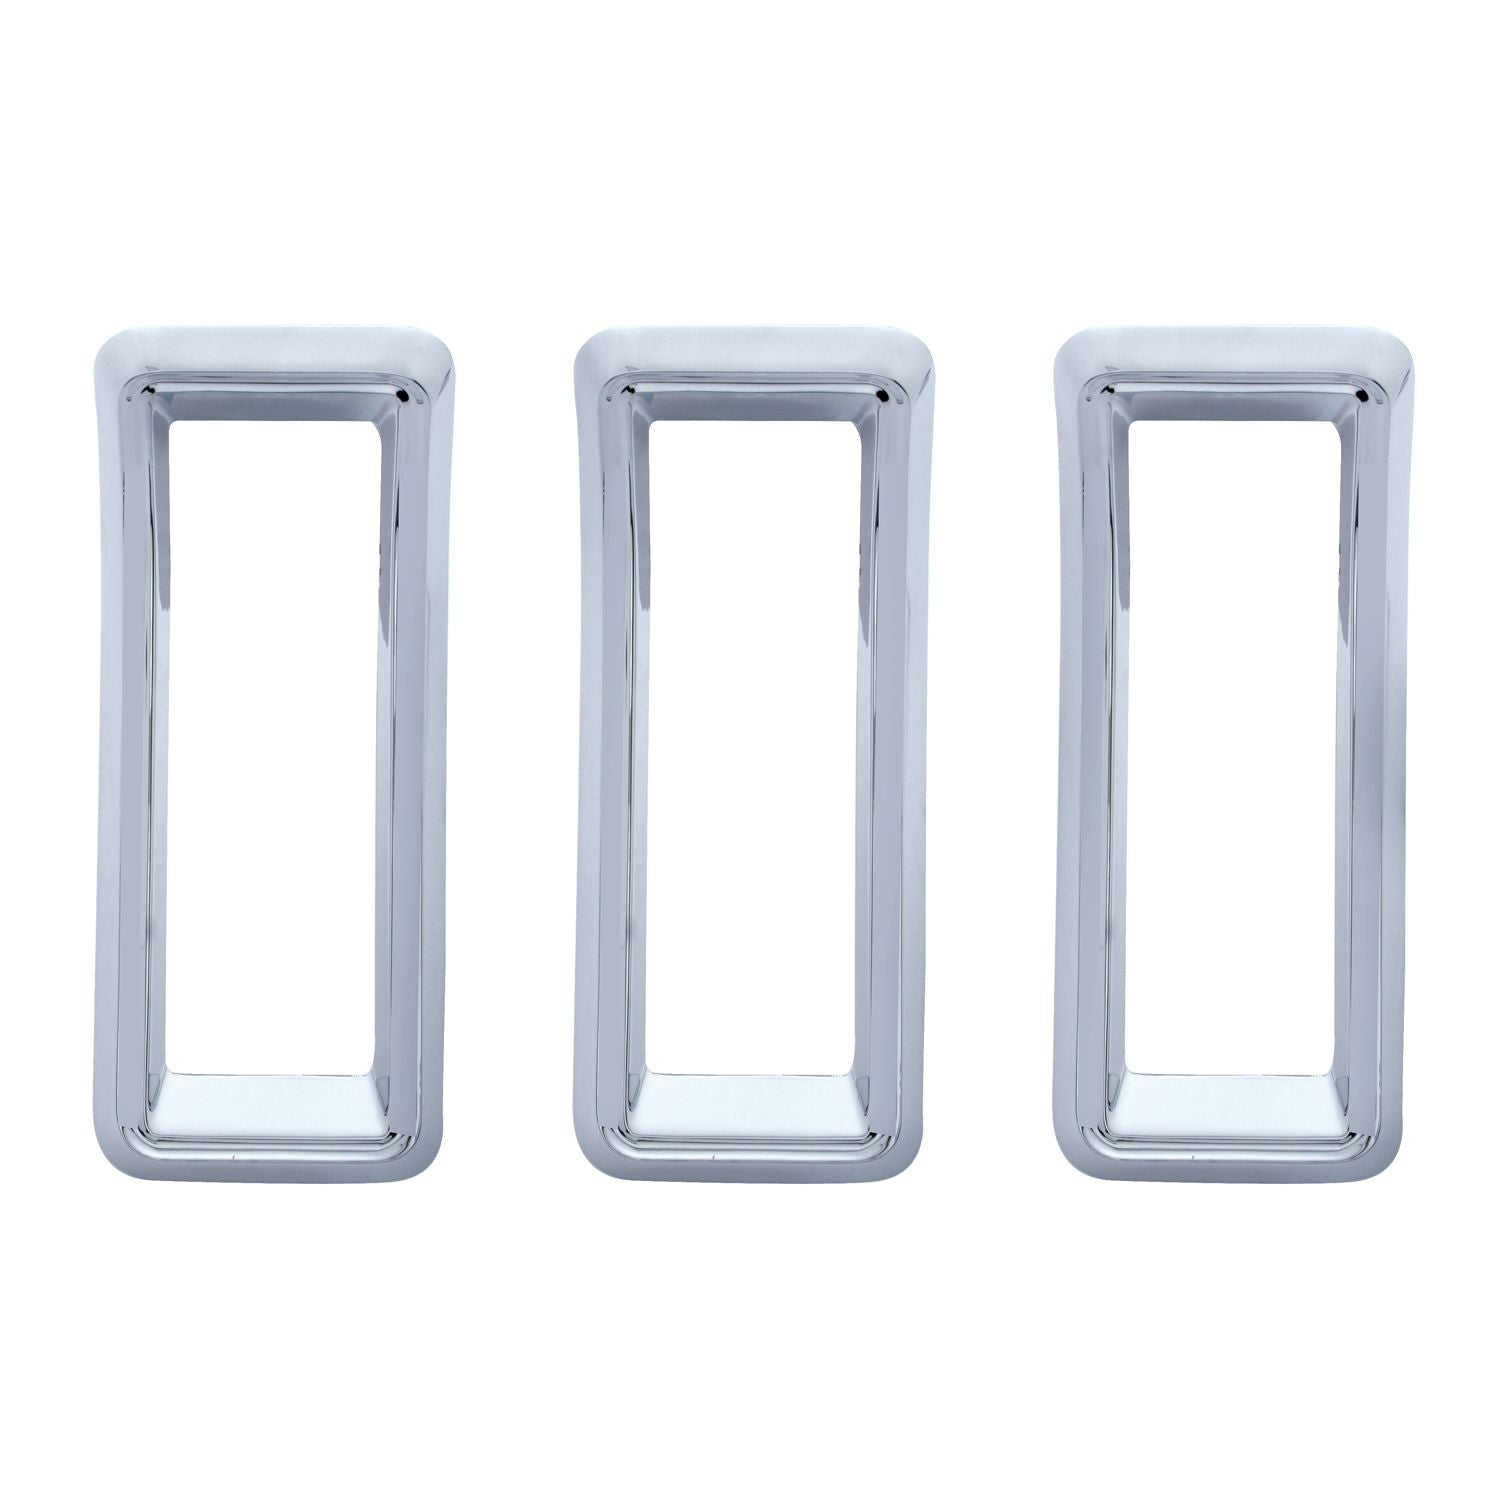 1967 Ford Mustang Tail Light Bezels (3 Pack)